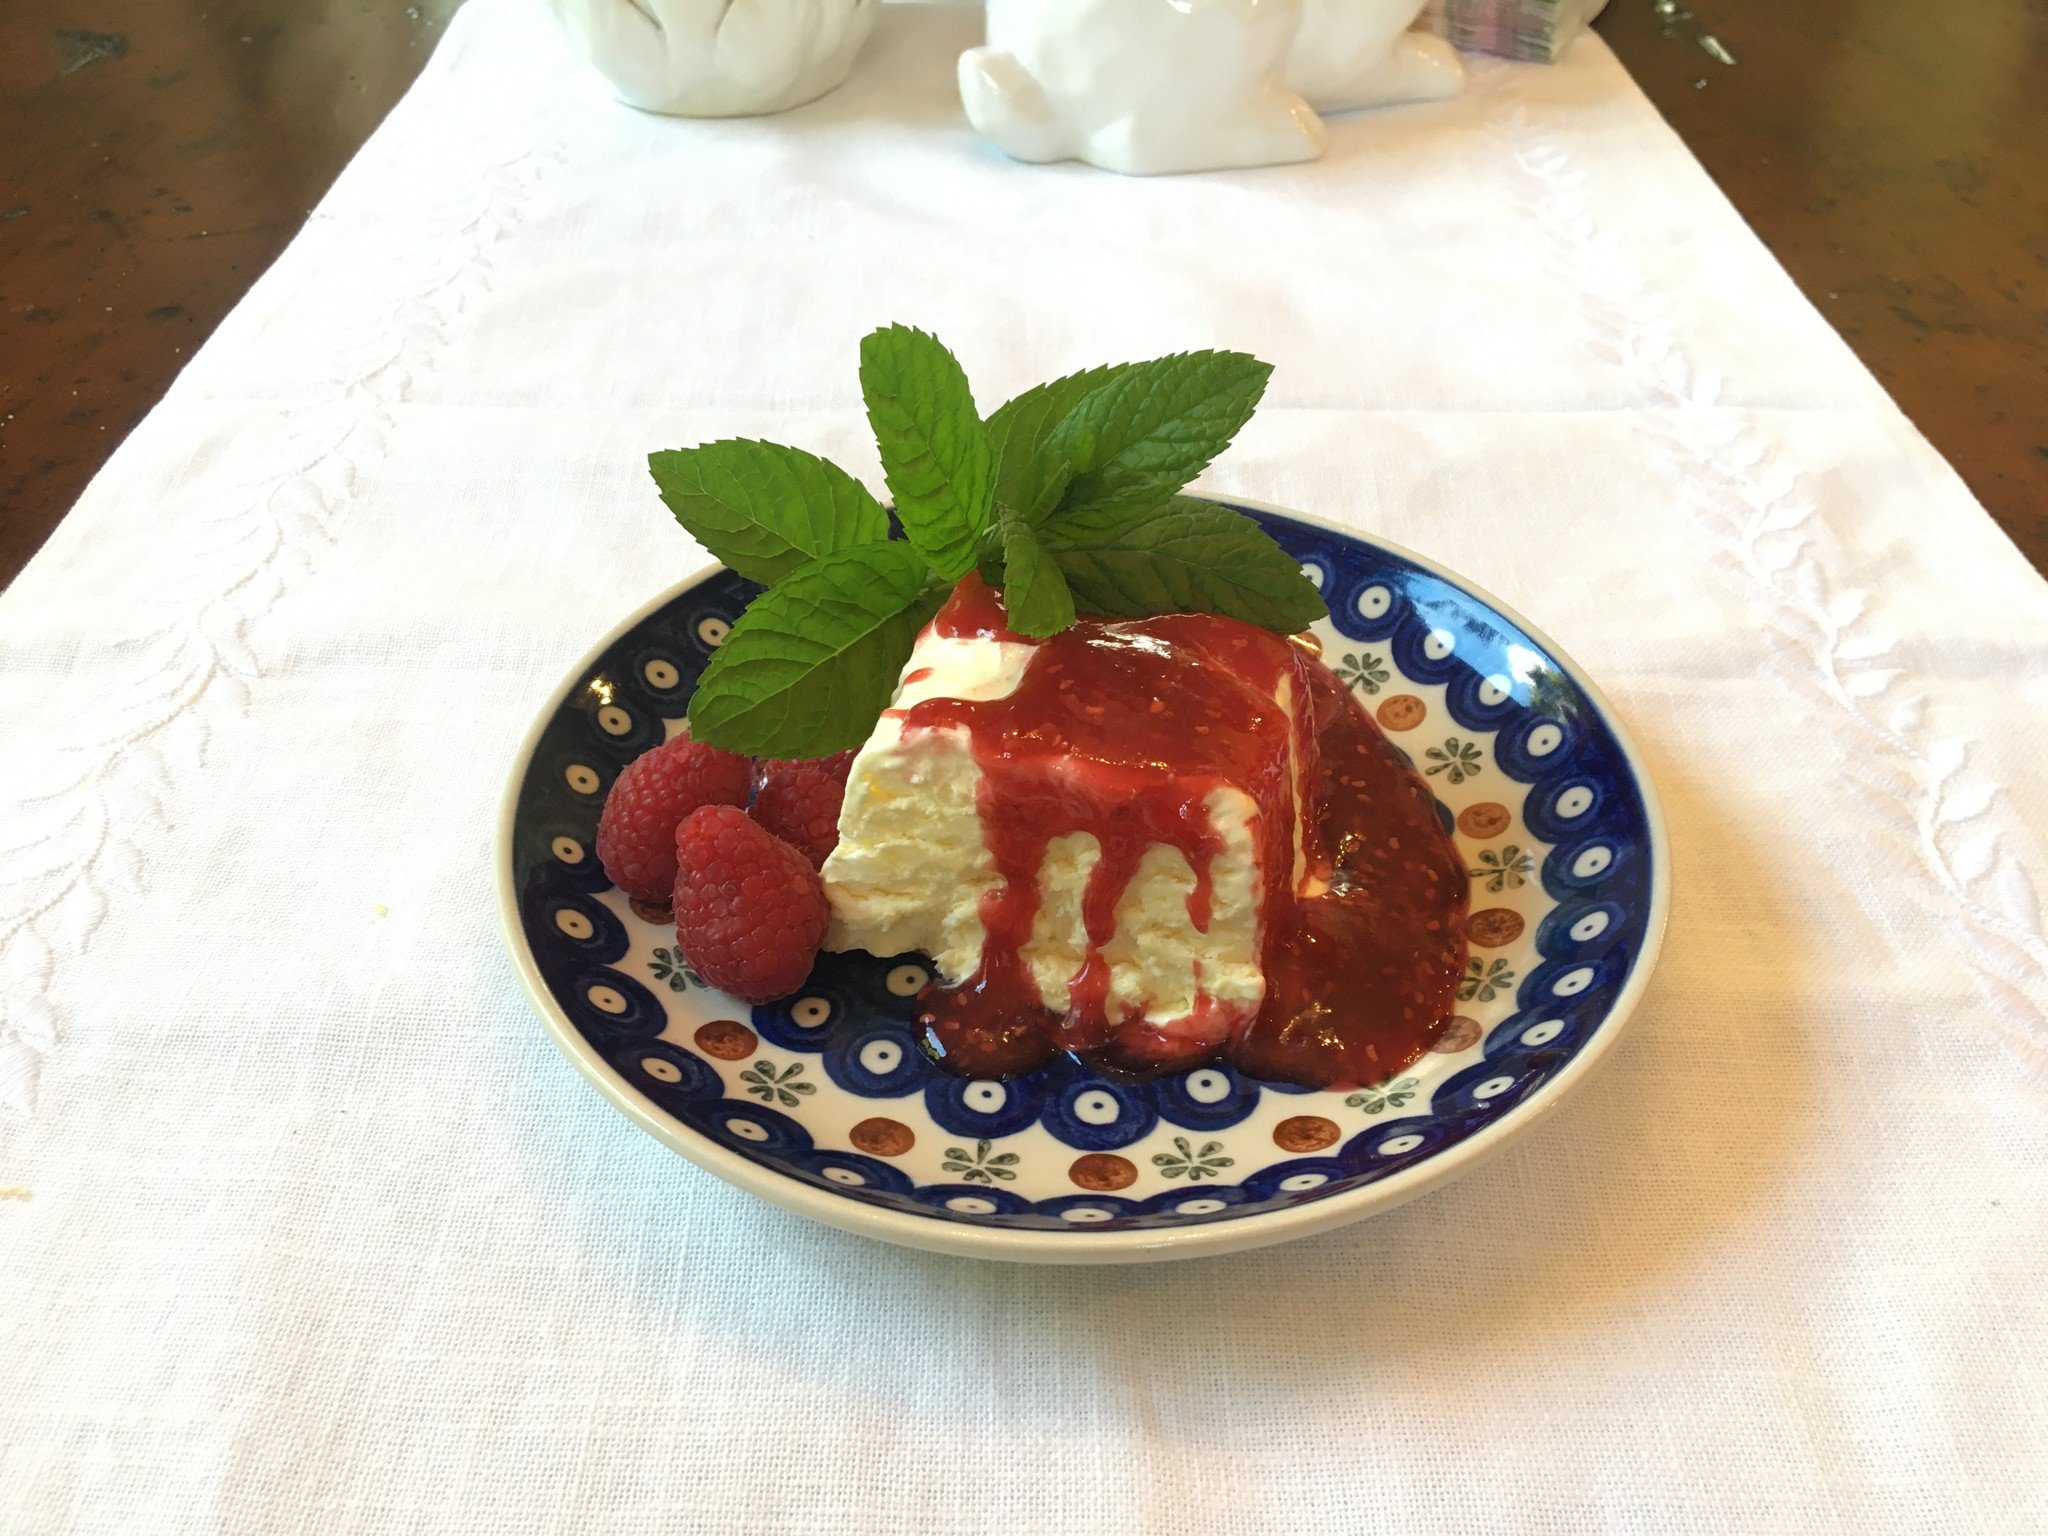 Vanilla Semifreddo with Rasberry Sauce......the perfect ending to a great meal!